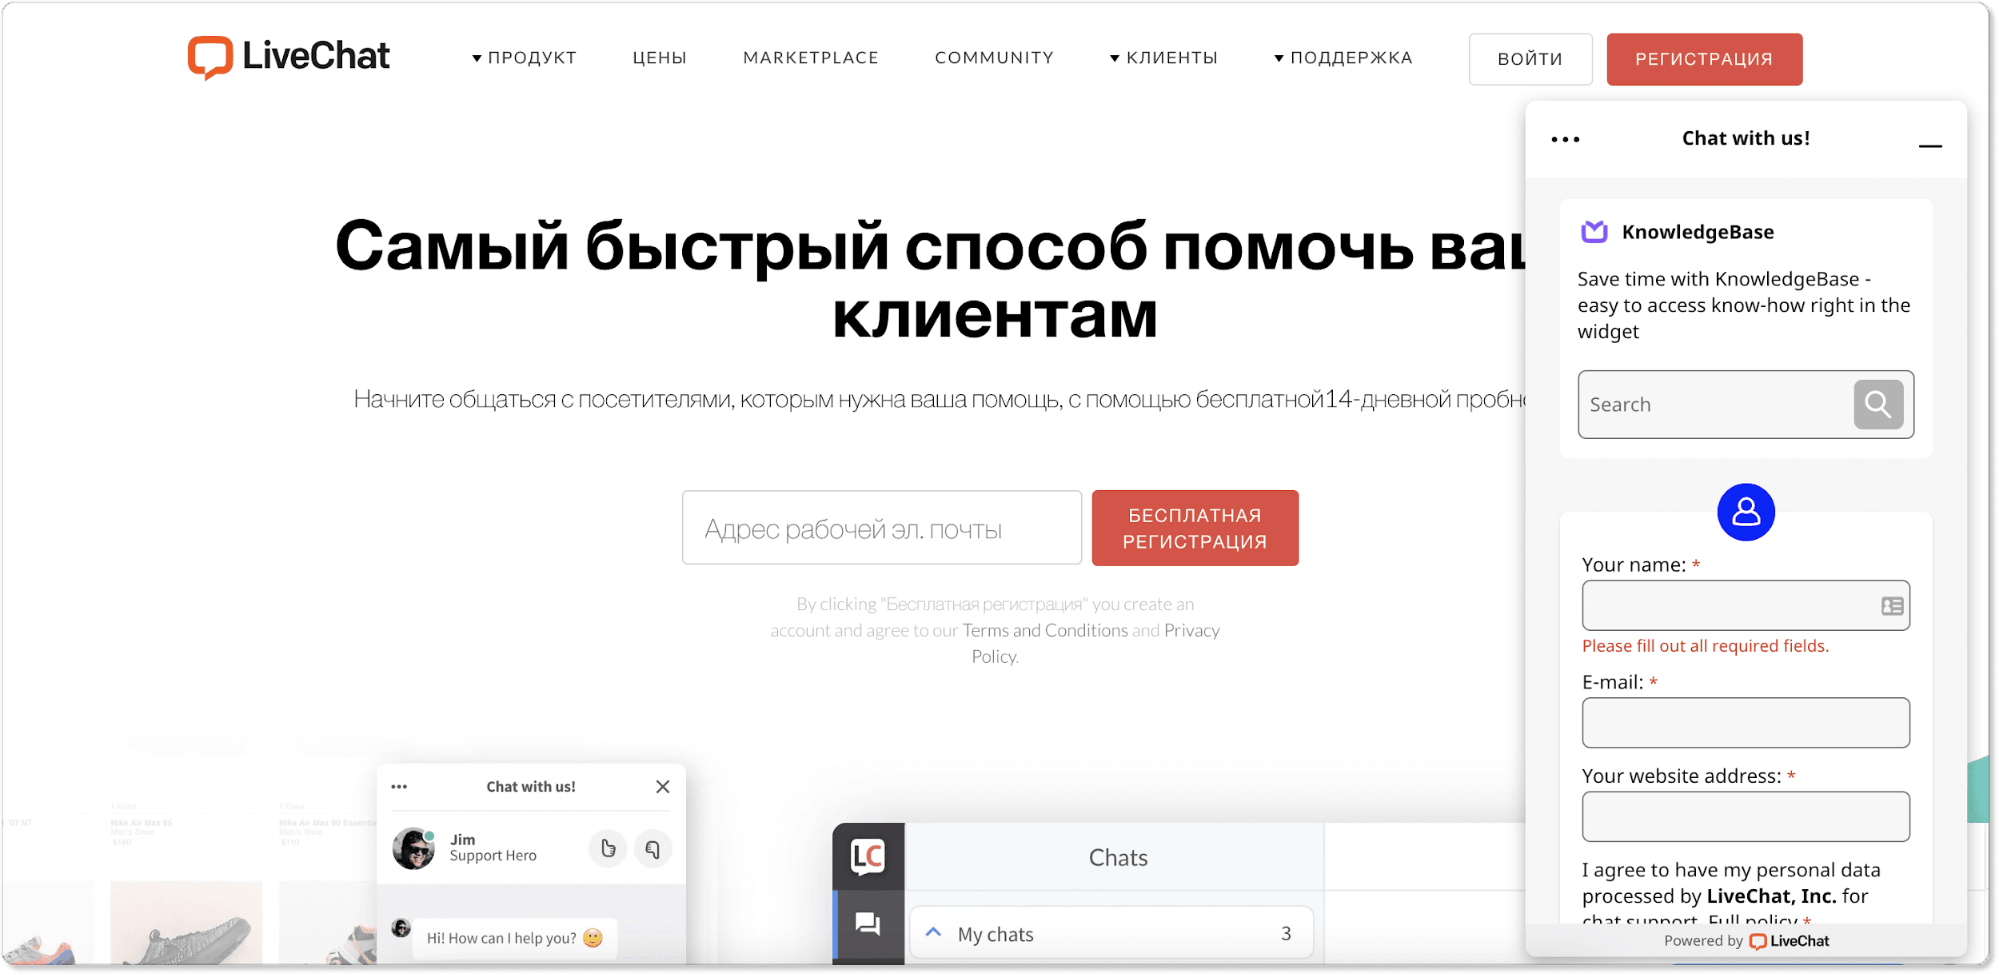 LiveChat home page ru version